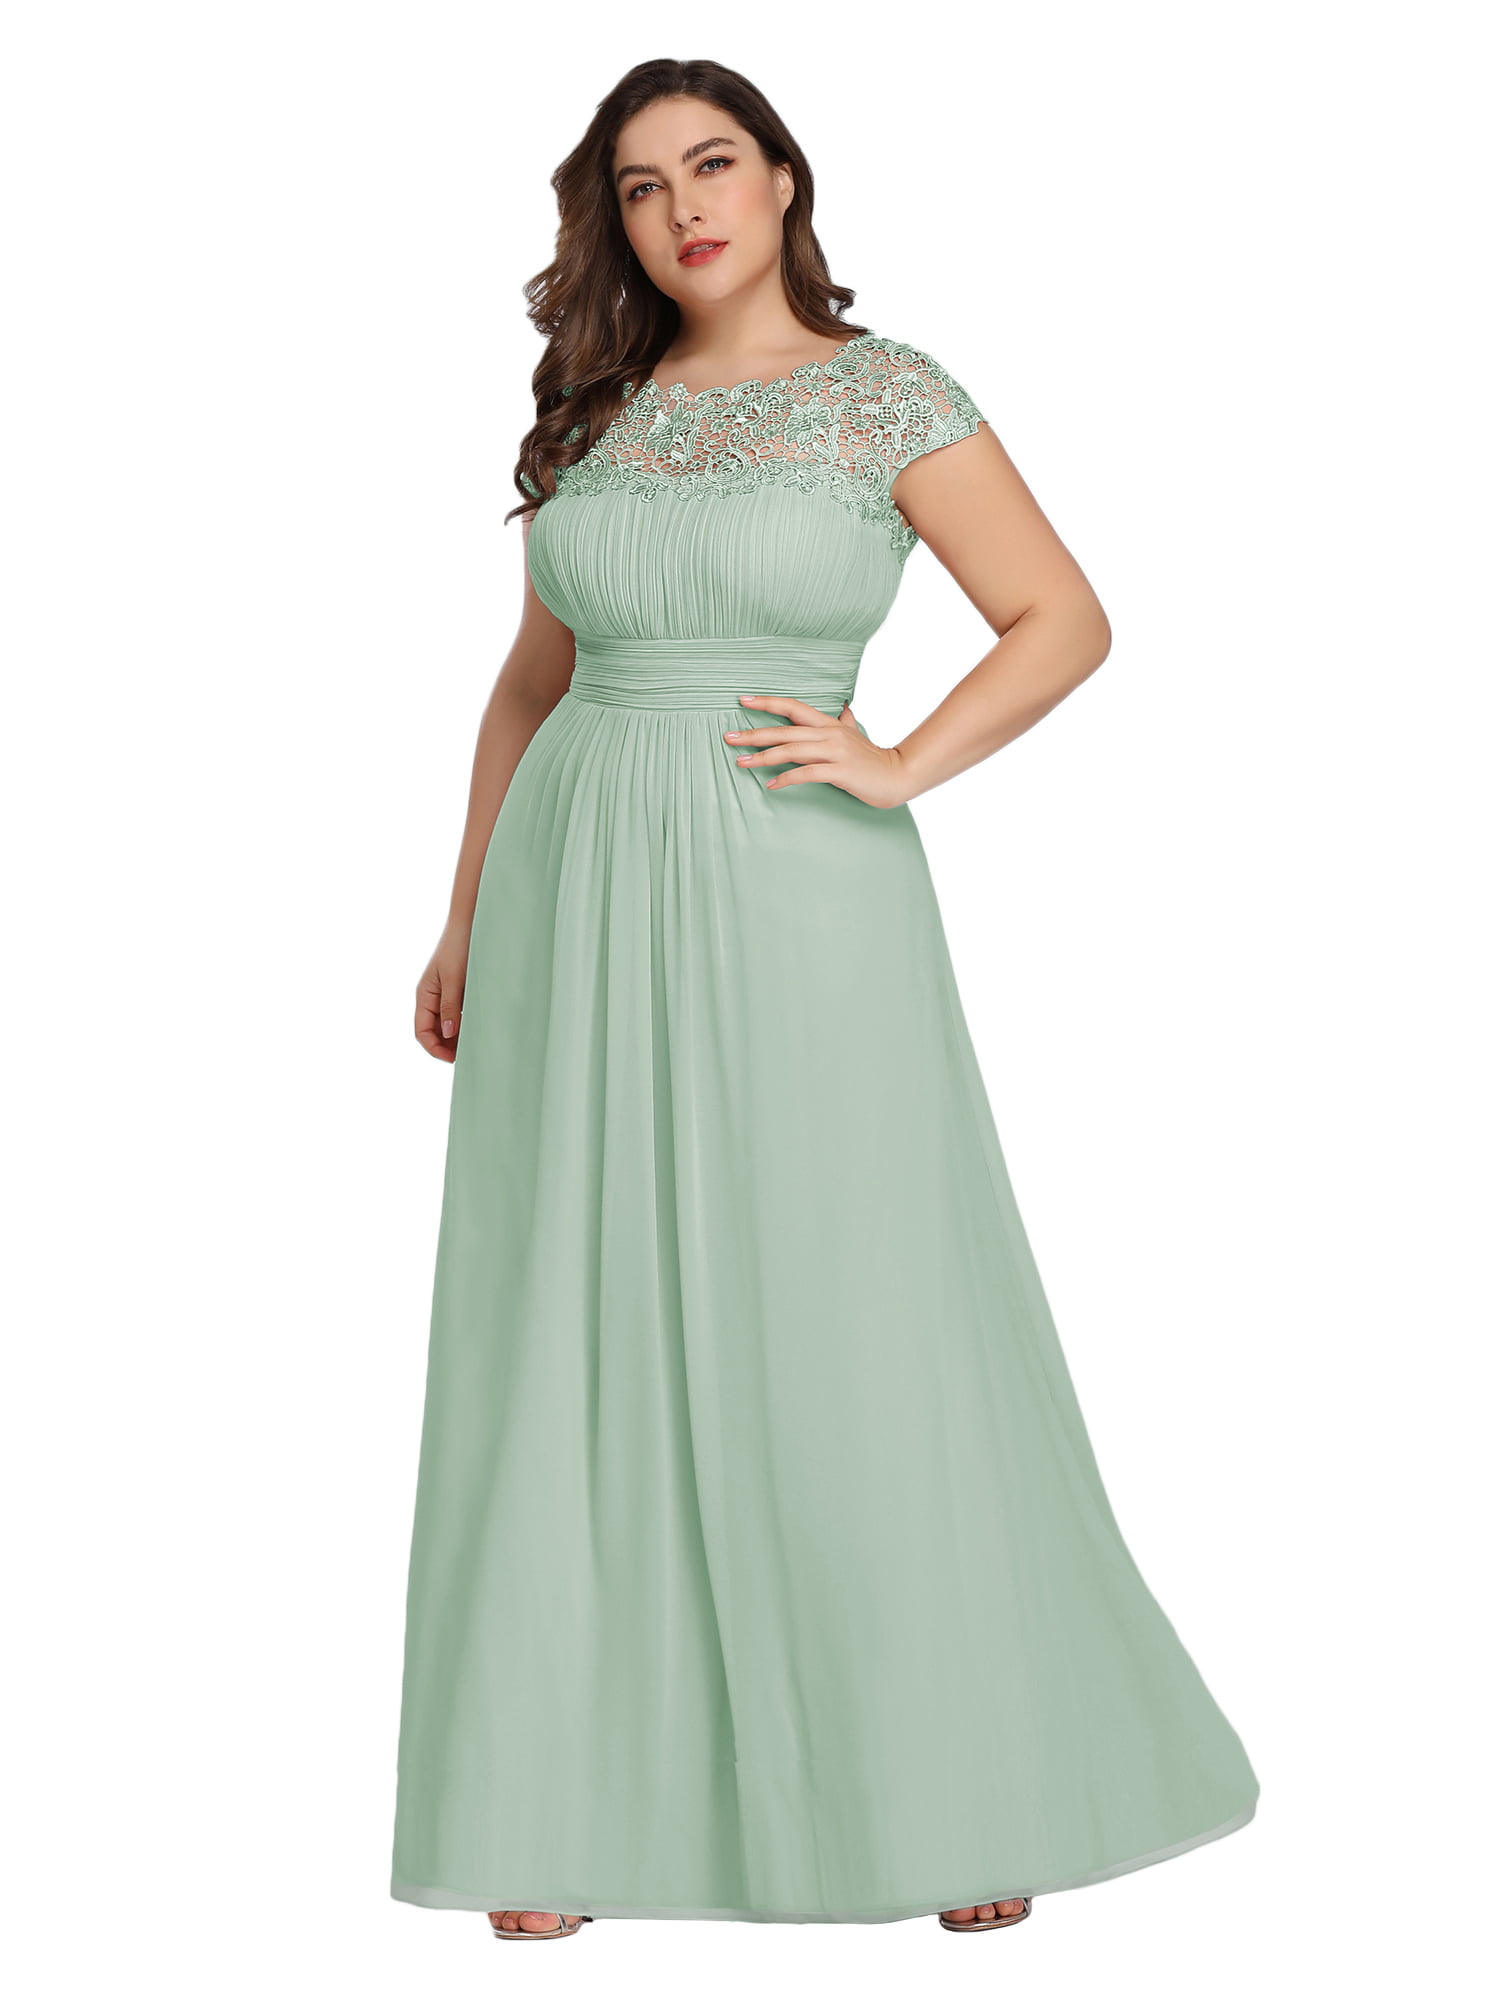 Long Chiffon Lace Evening Formal Party Ball Gown Prom Bridesmaid Dress Size 8-24 